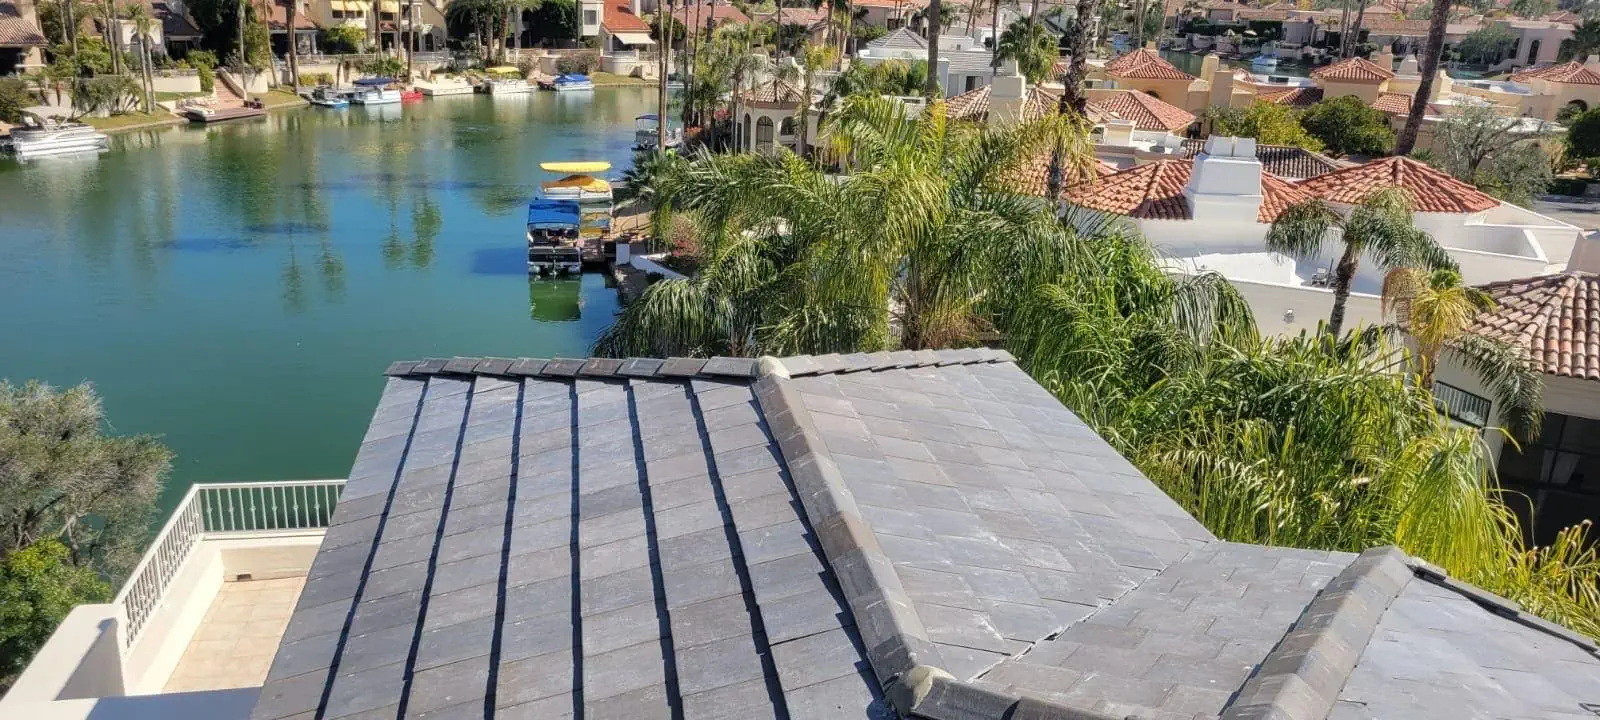 tile roof replacement done by behmer scottsdale az